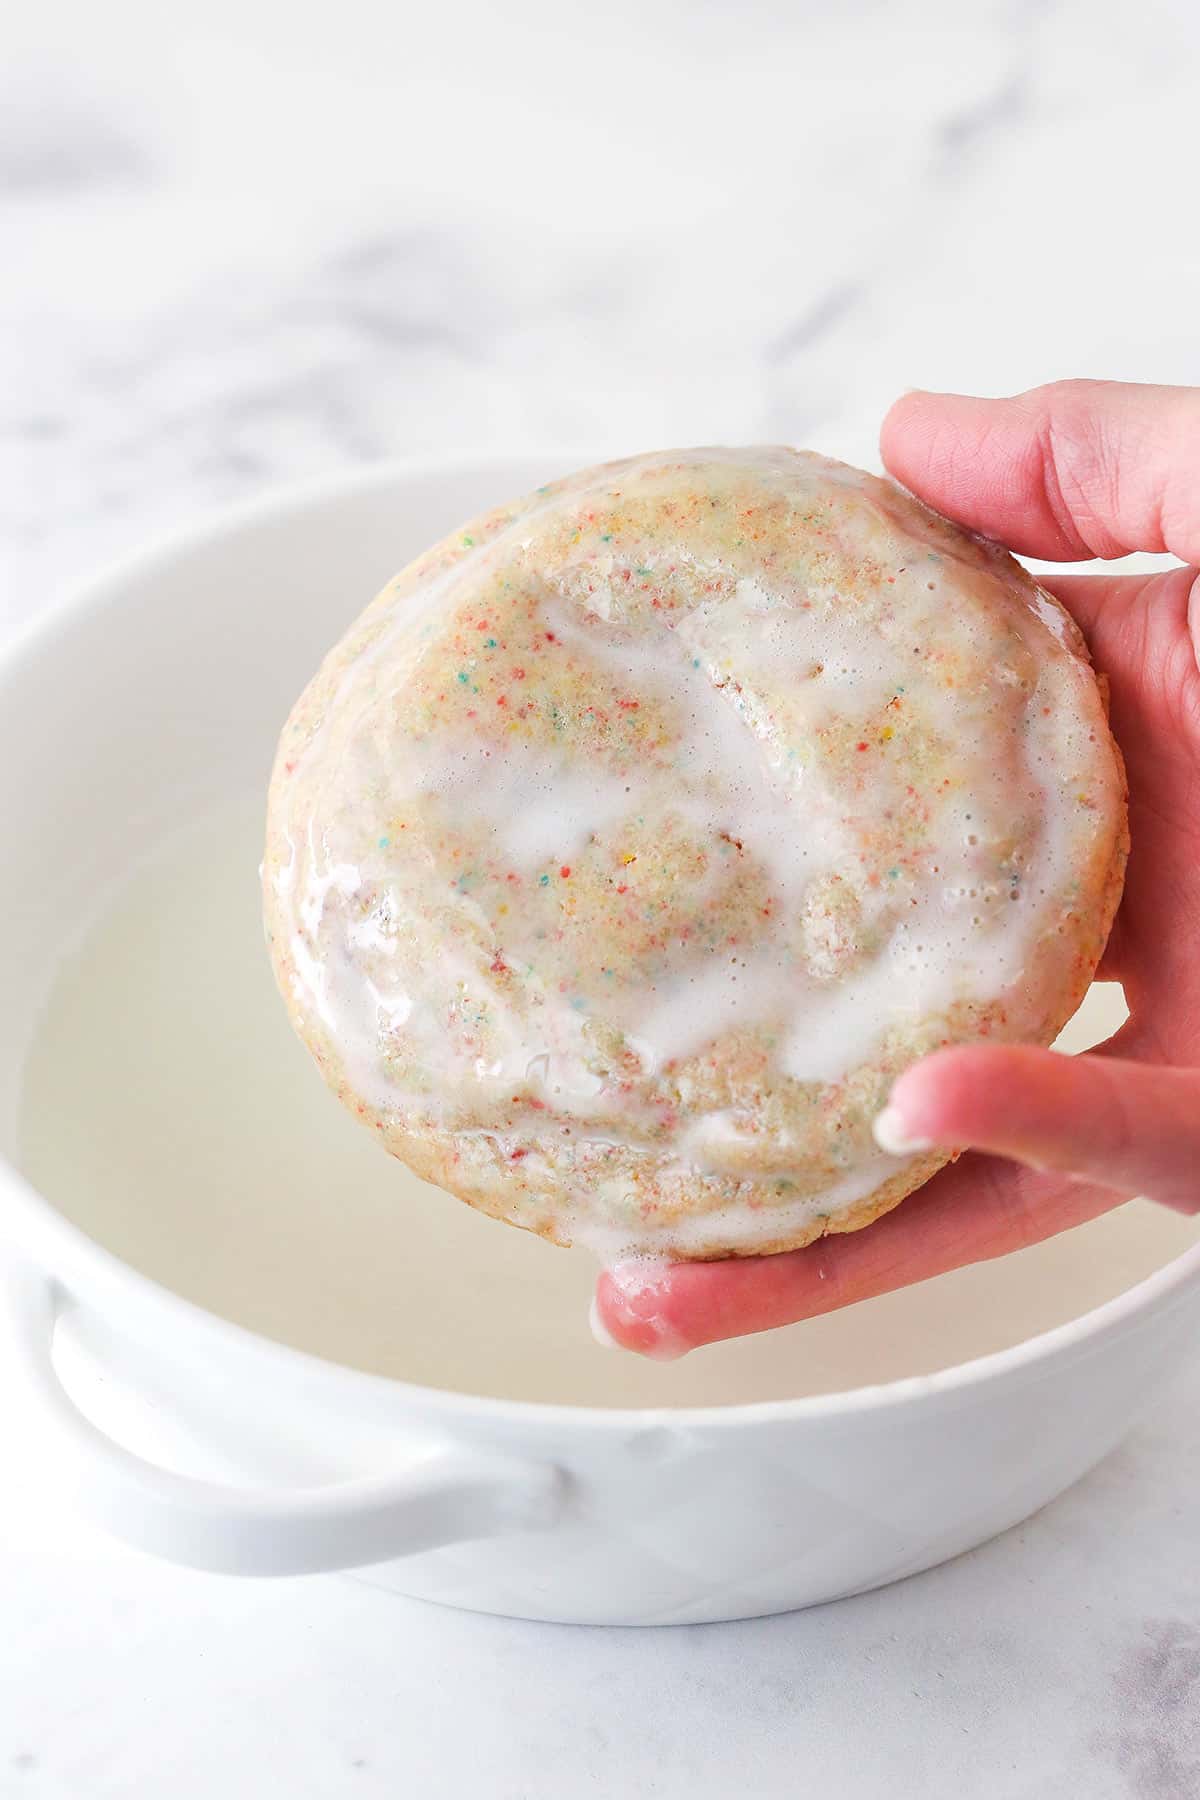 Dipping a Fruity Pebbles cookie in a bowl of glaze.